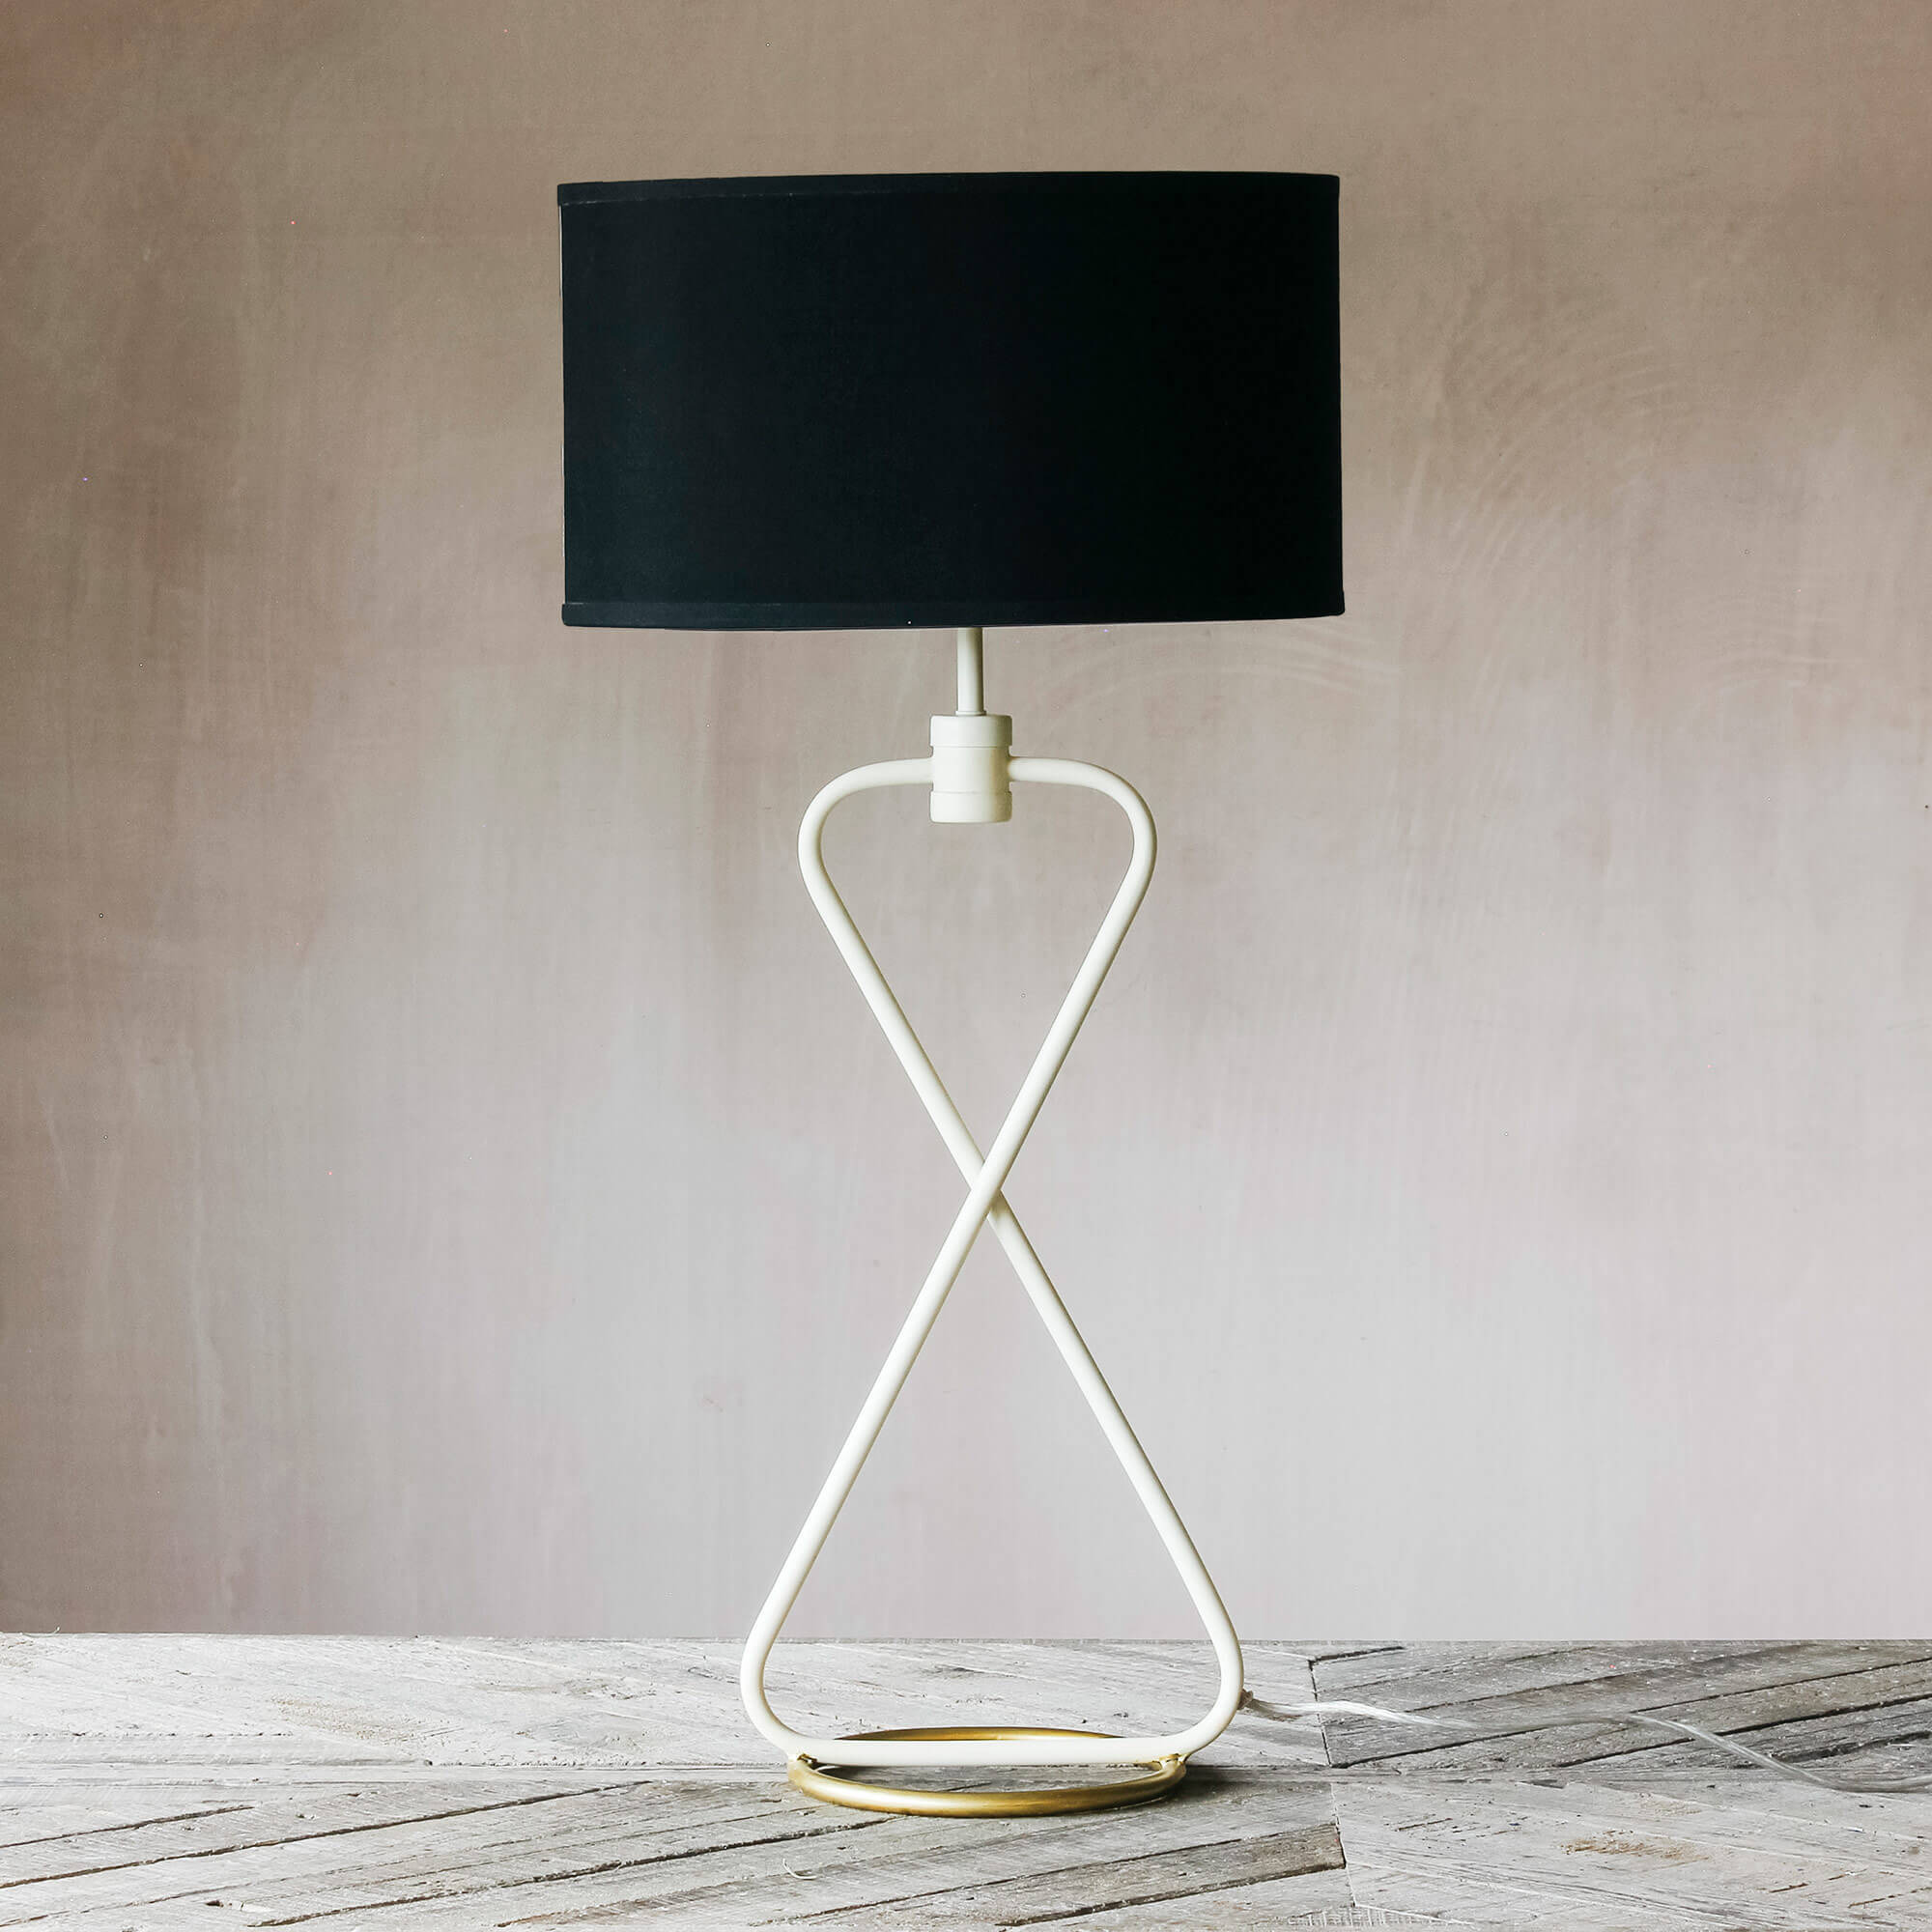 Laurent Ivory Table Lamp - image 1